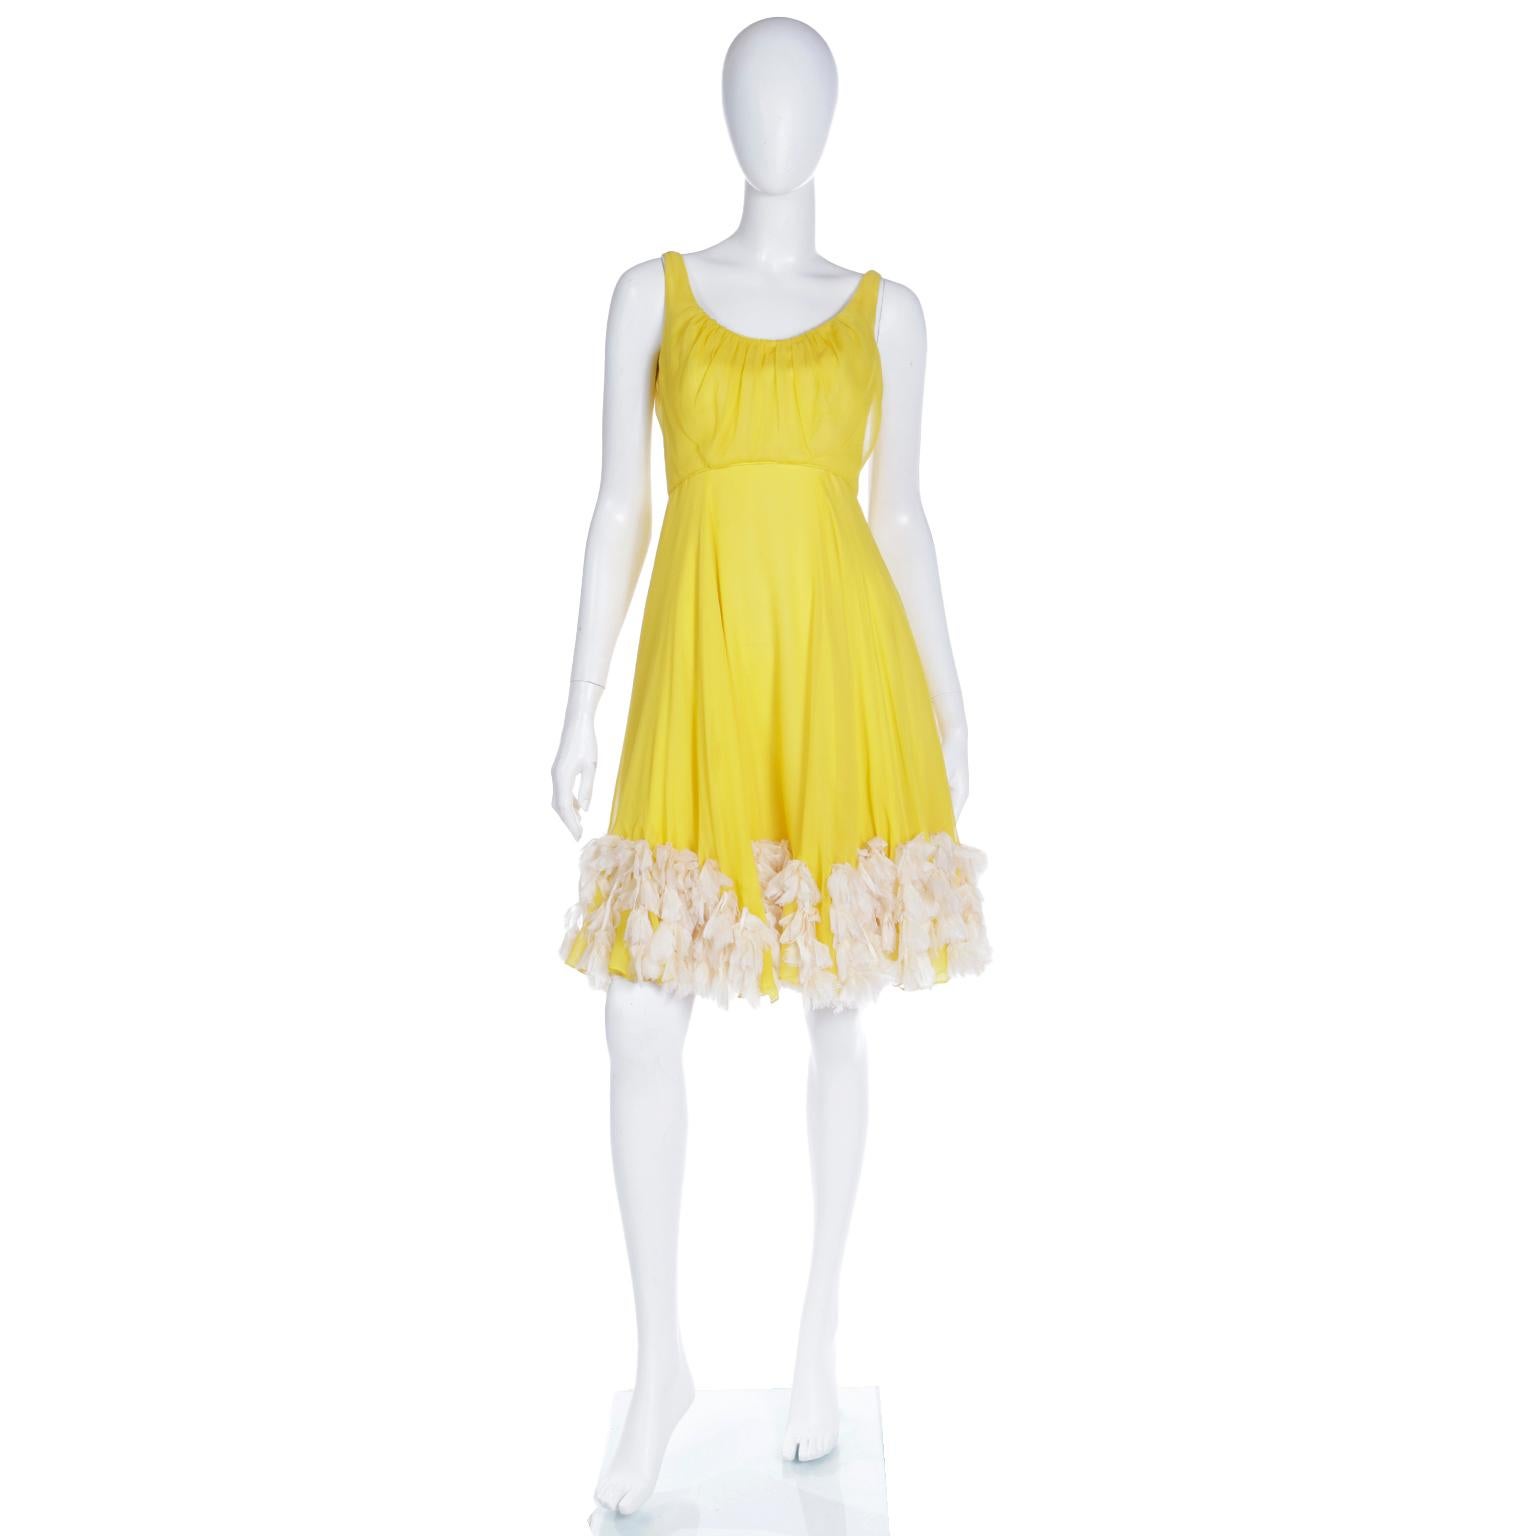 This ethereal vintage 1960's yellow silk chiffon dress has unique rows of faux feather trim around the hemline. The 